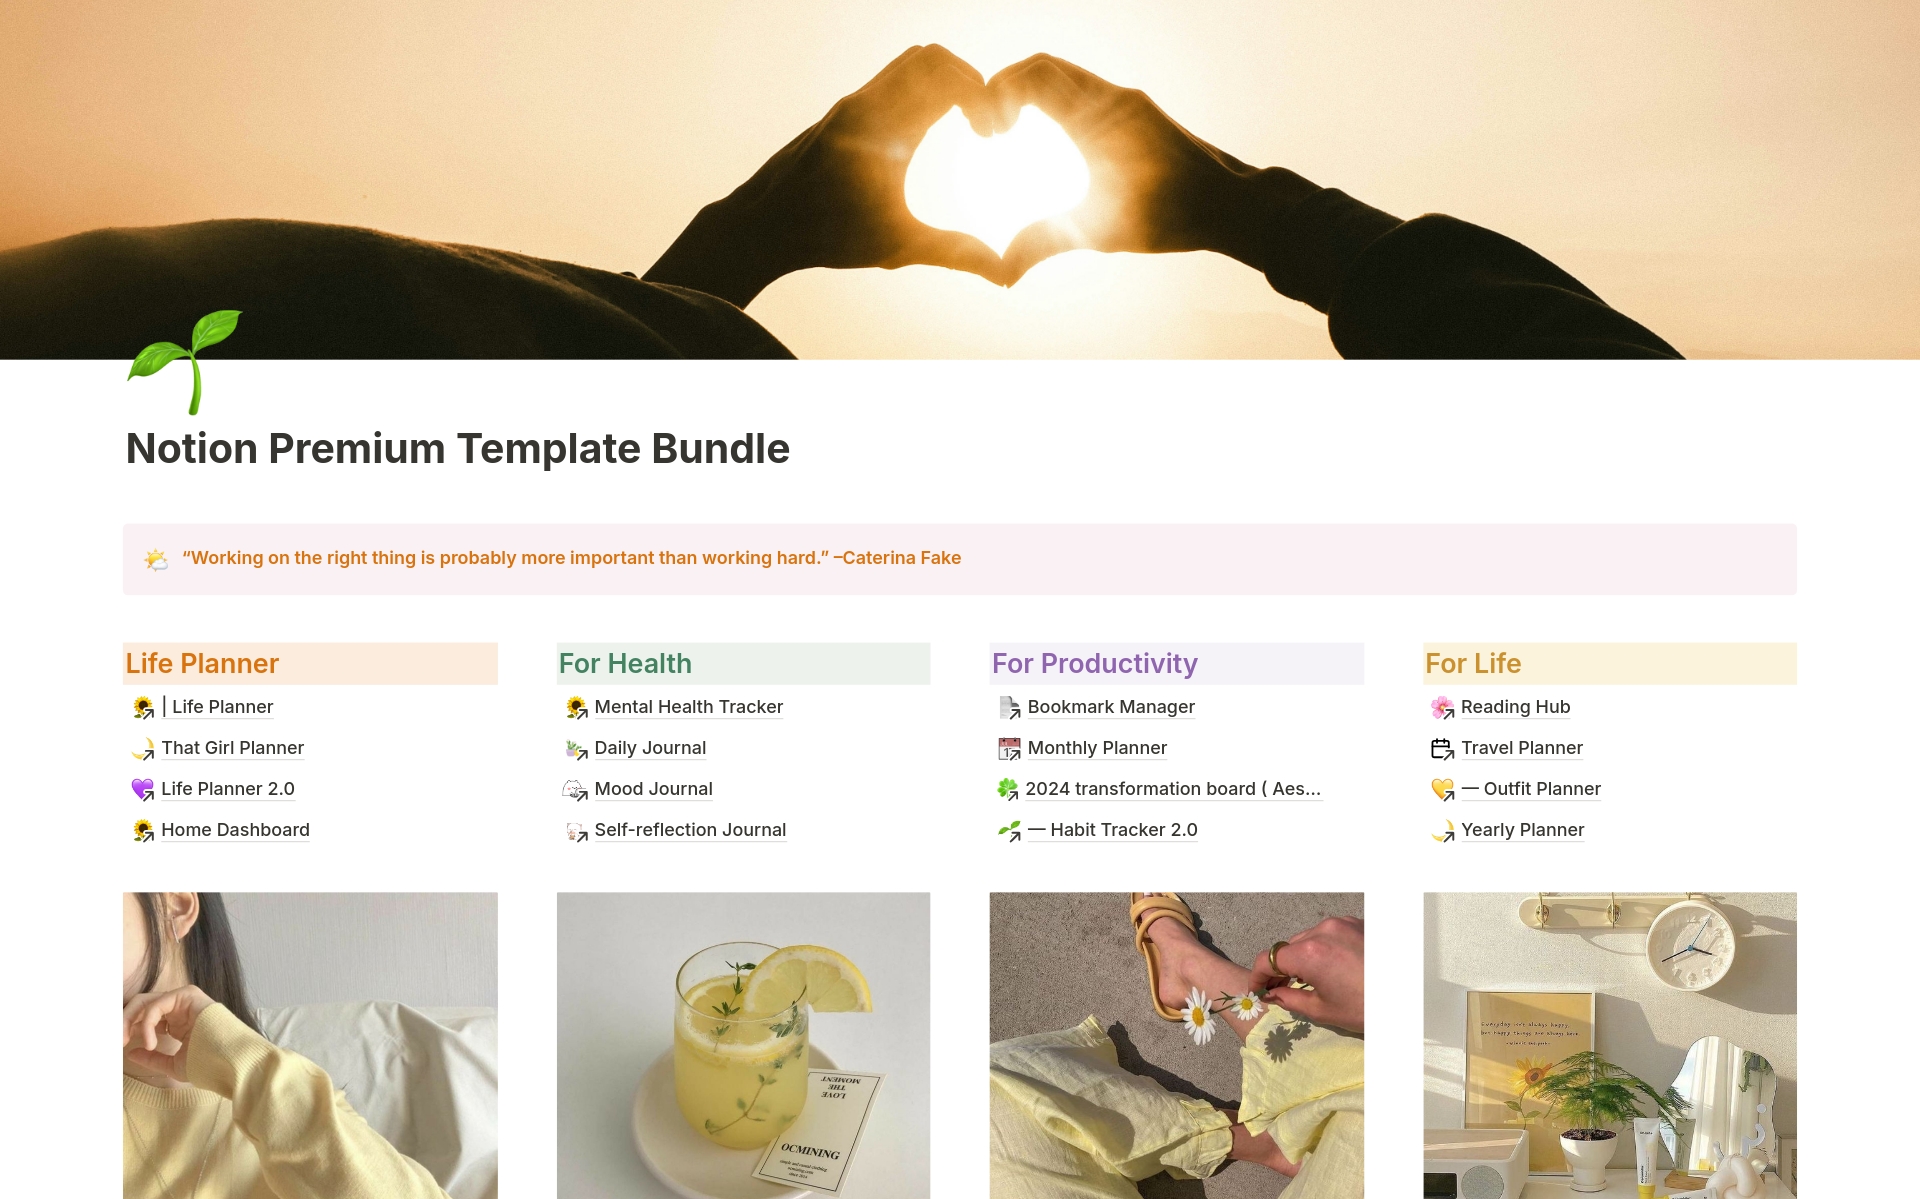 This complete bundle is a collection of all the premium templates in one place. You'll get 25+ templates inside the bundle. 